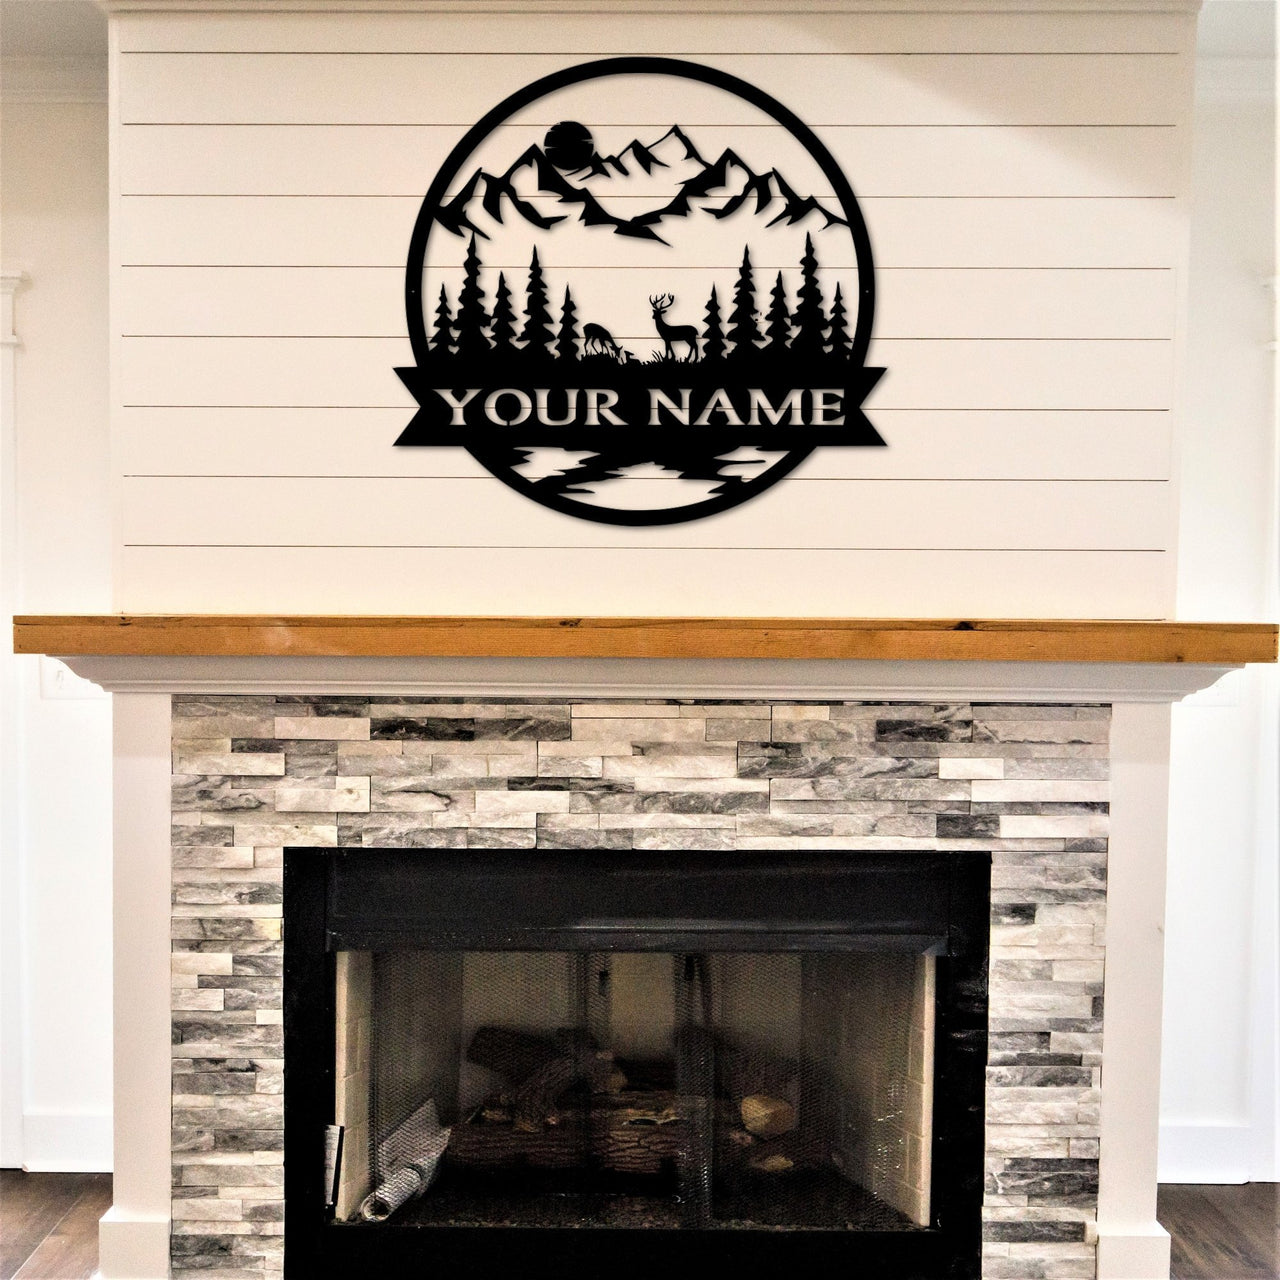 Deer Scene Name Sign | Metal Wall Art | Custom Metal Last Name Sign | The Great Outdoors Family Name Sign for Cabin | Housewarming Gift